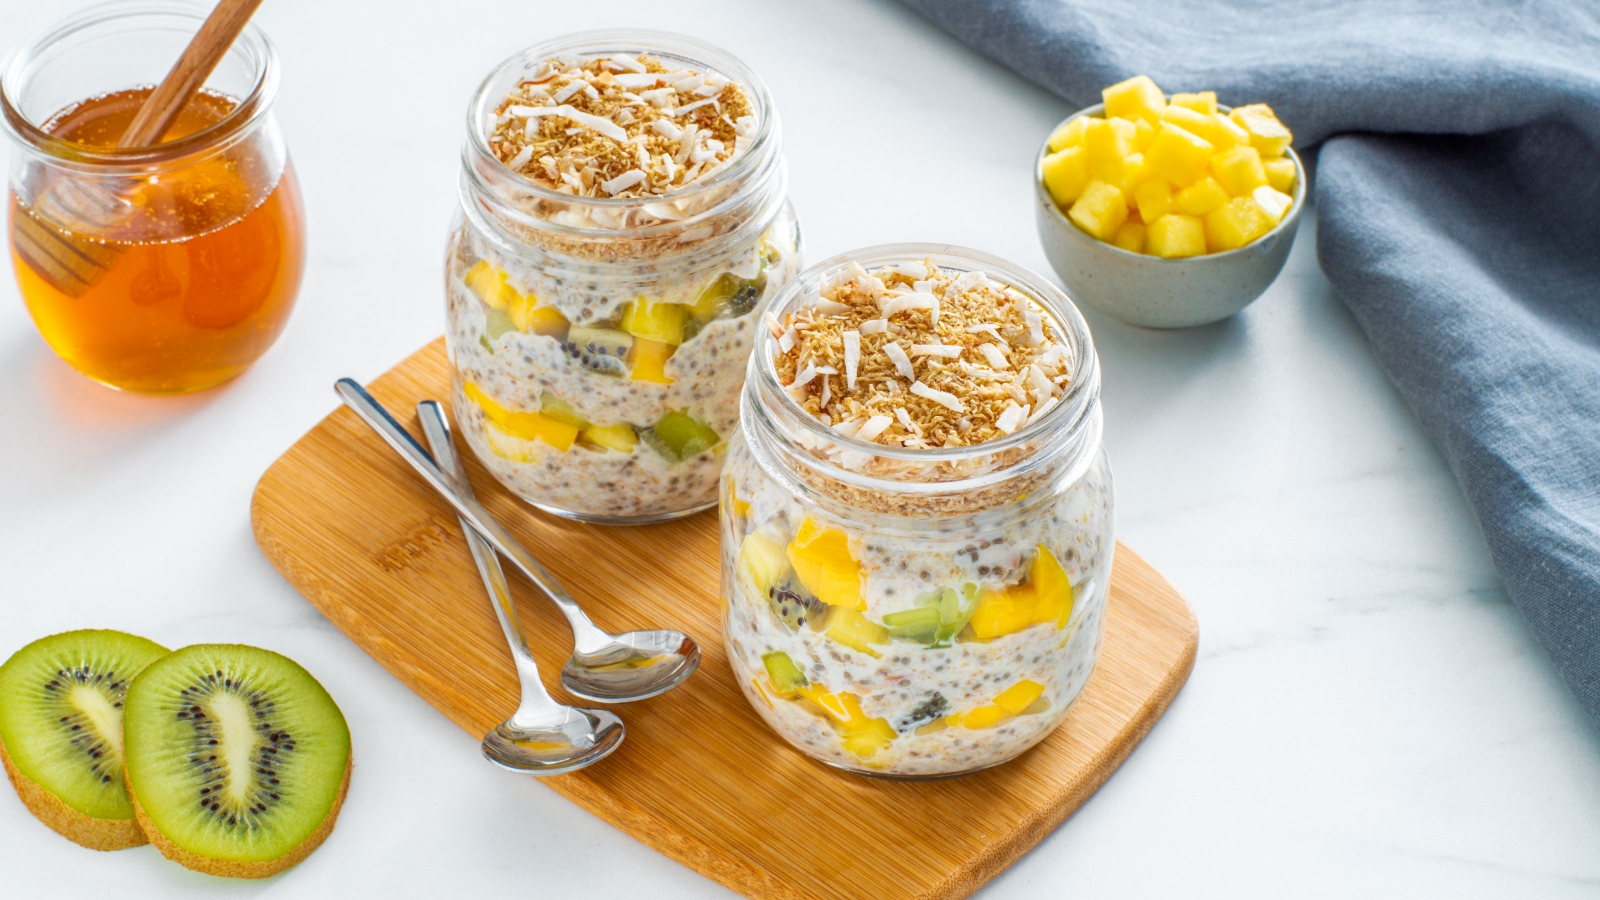 Coconut Chia and Shredded Wheat Pudding in mason jars on a wooden cutting board with kiwi slices, a jar of honey and diced fruit in the background.